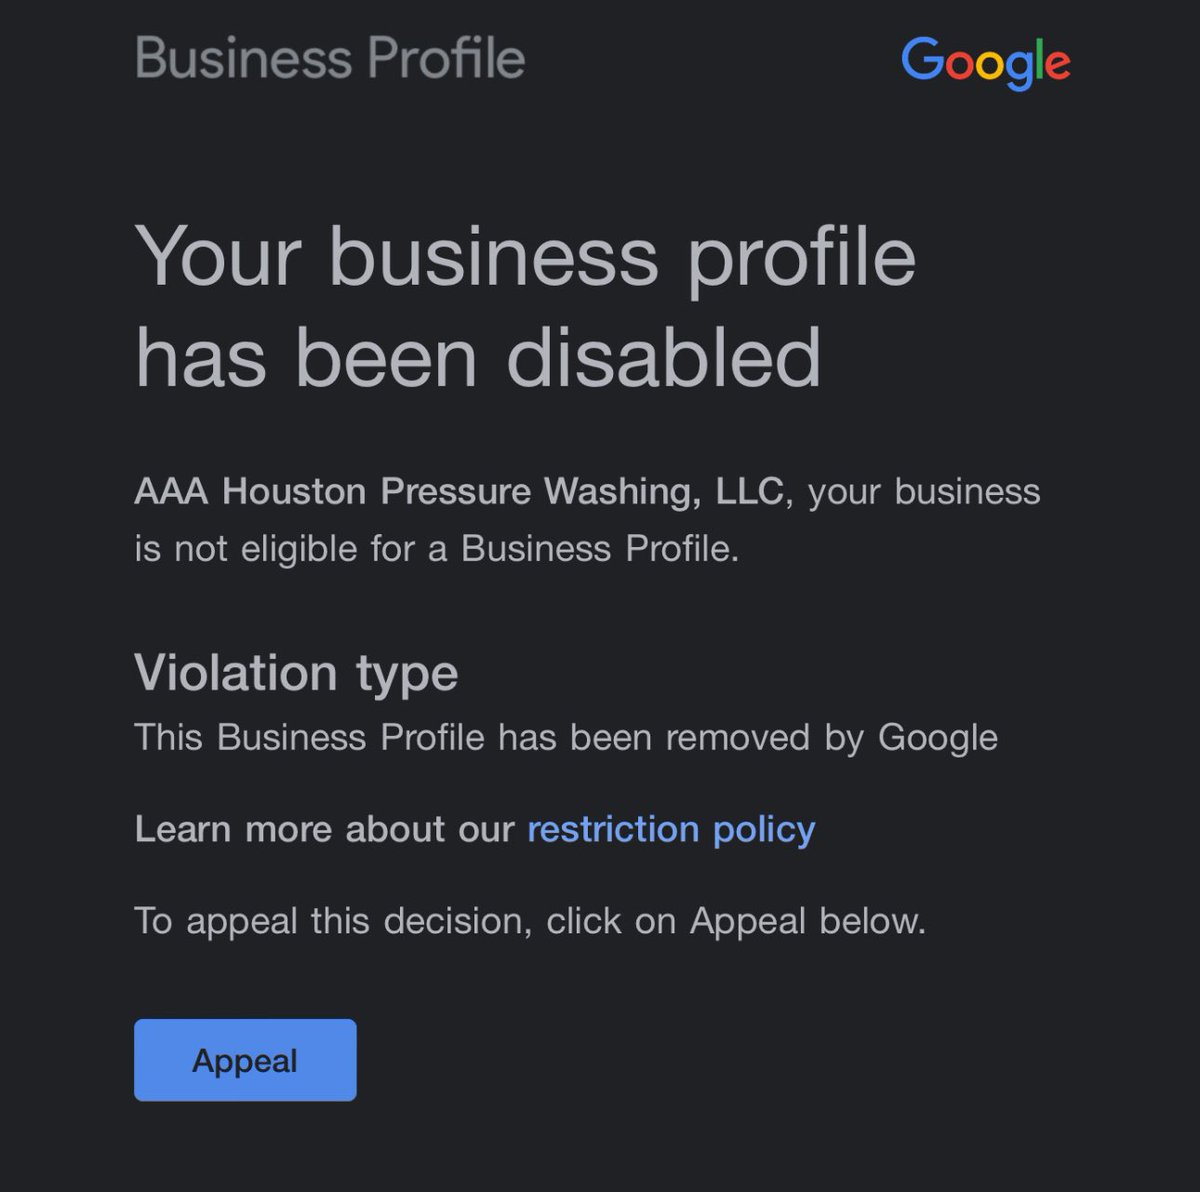 'Hey @Google, 14 years of trust, documentation, and legitimacy. So why the silent treatment on reinstating my business profile? It's time for answers. #GoogleMyBusiness #UnfairTreatment'